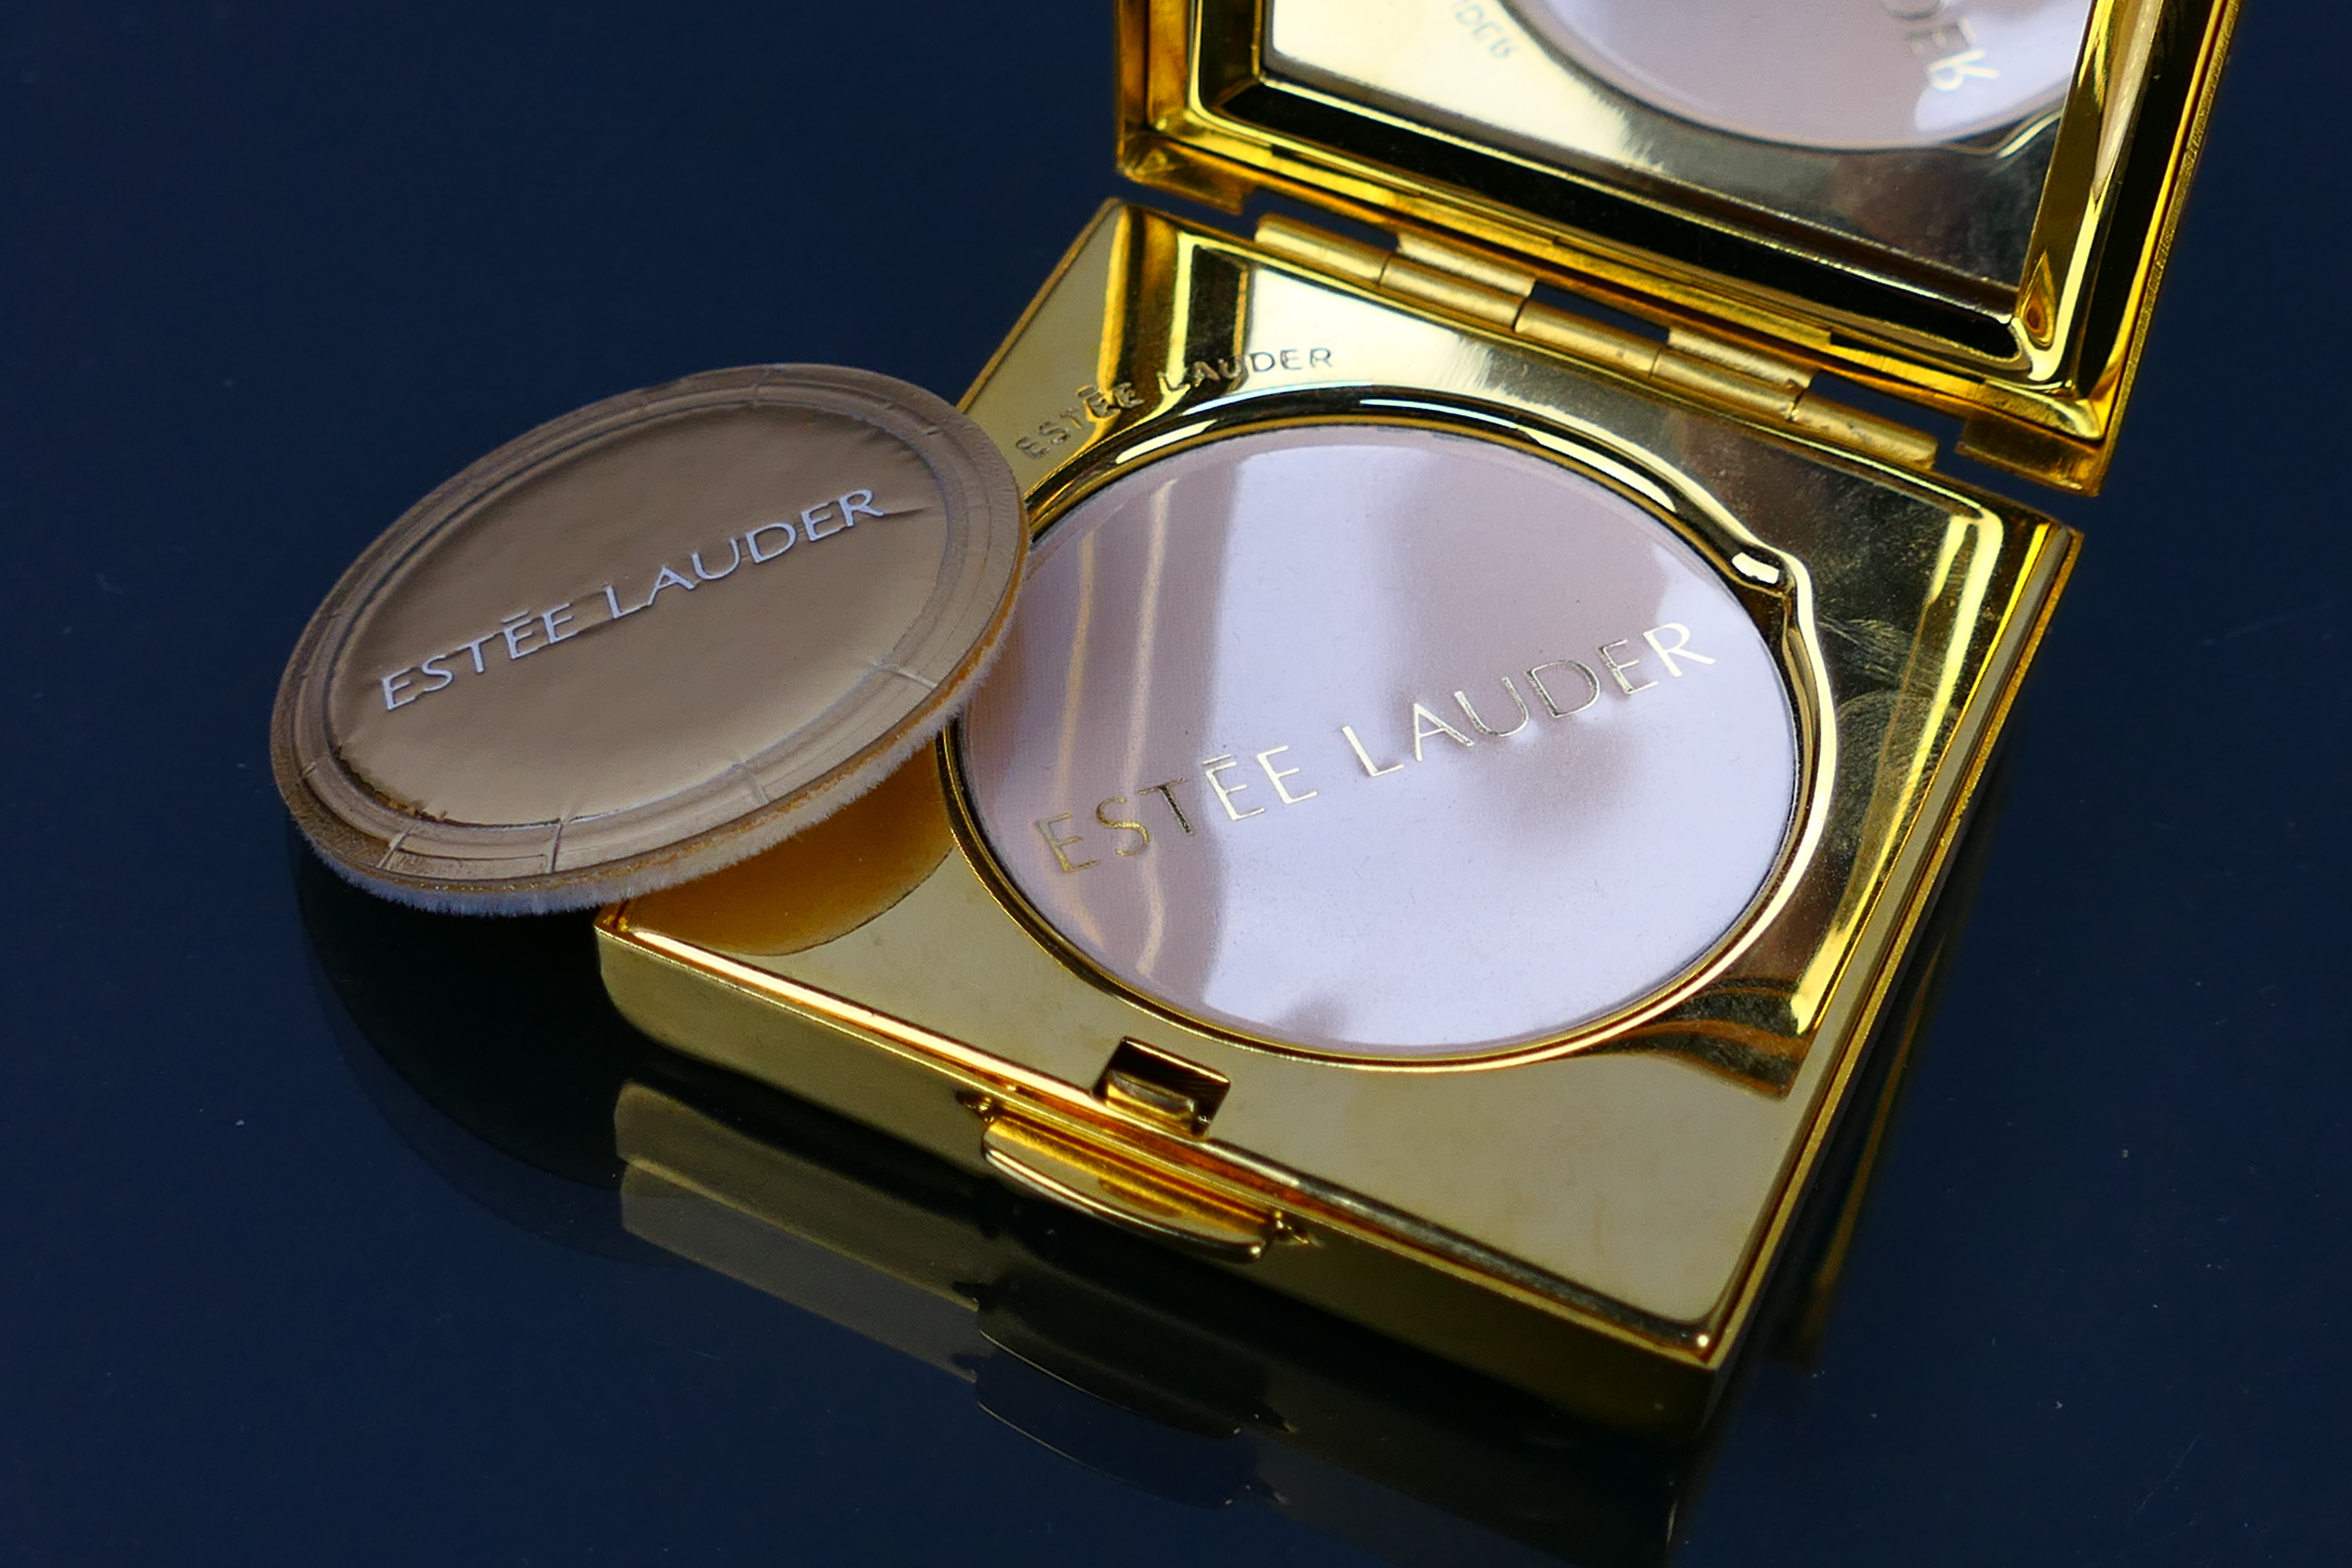 Estee Lauder - 2 x boxed gilt metal Estee Lauder powder compacts - Lot includes a Bamboo Weave - Image 5 of 10